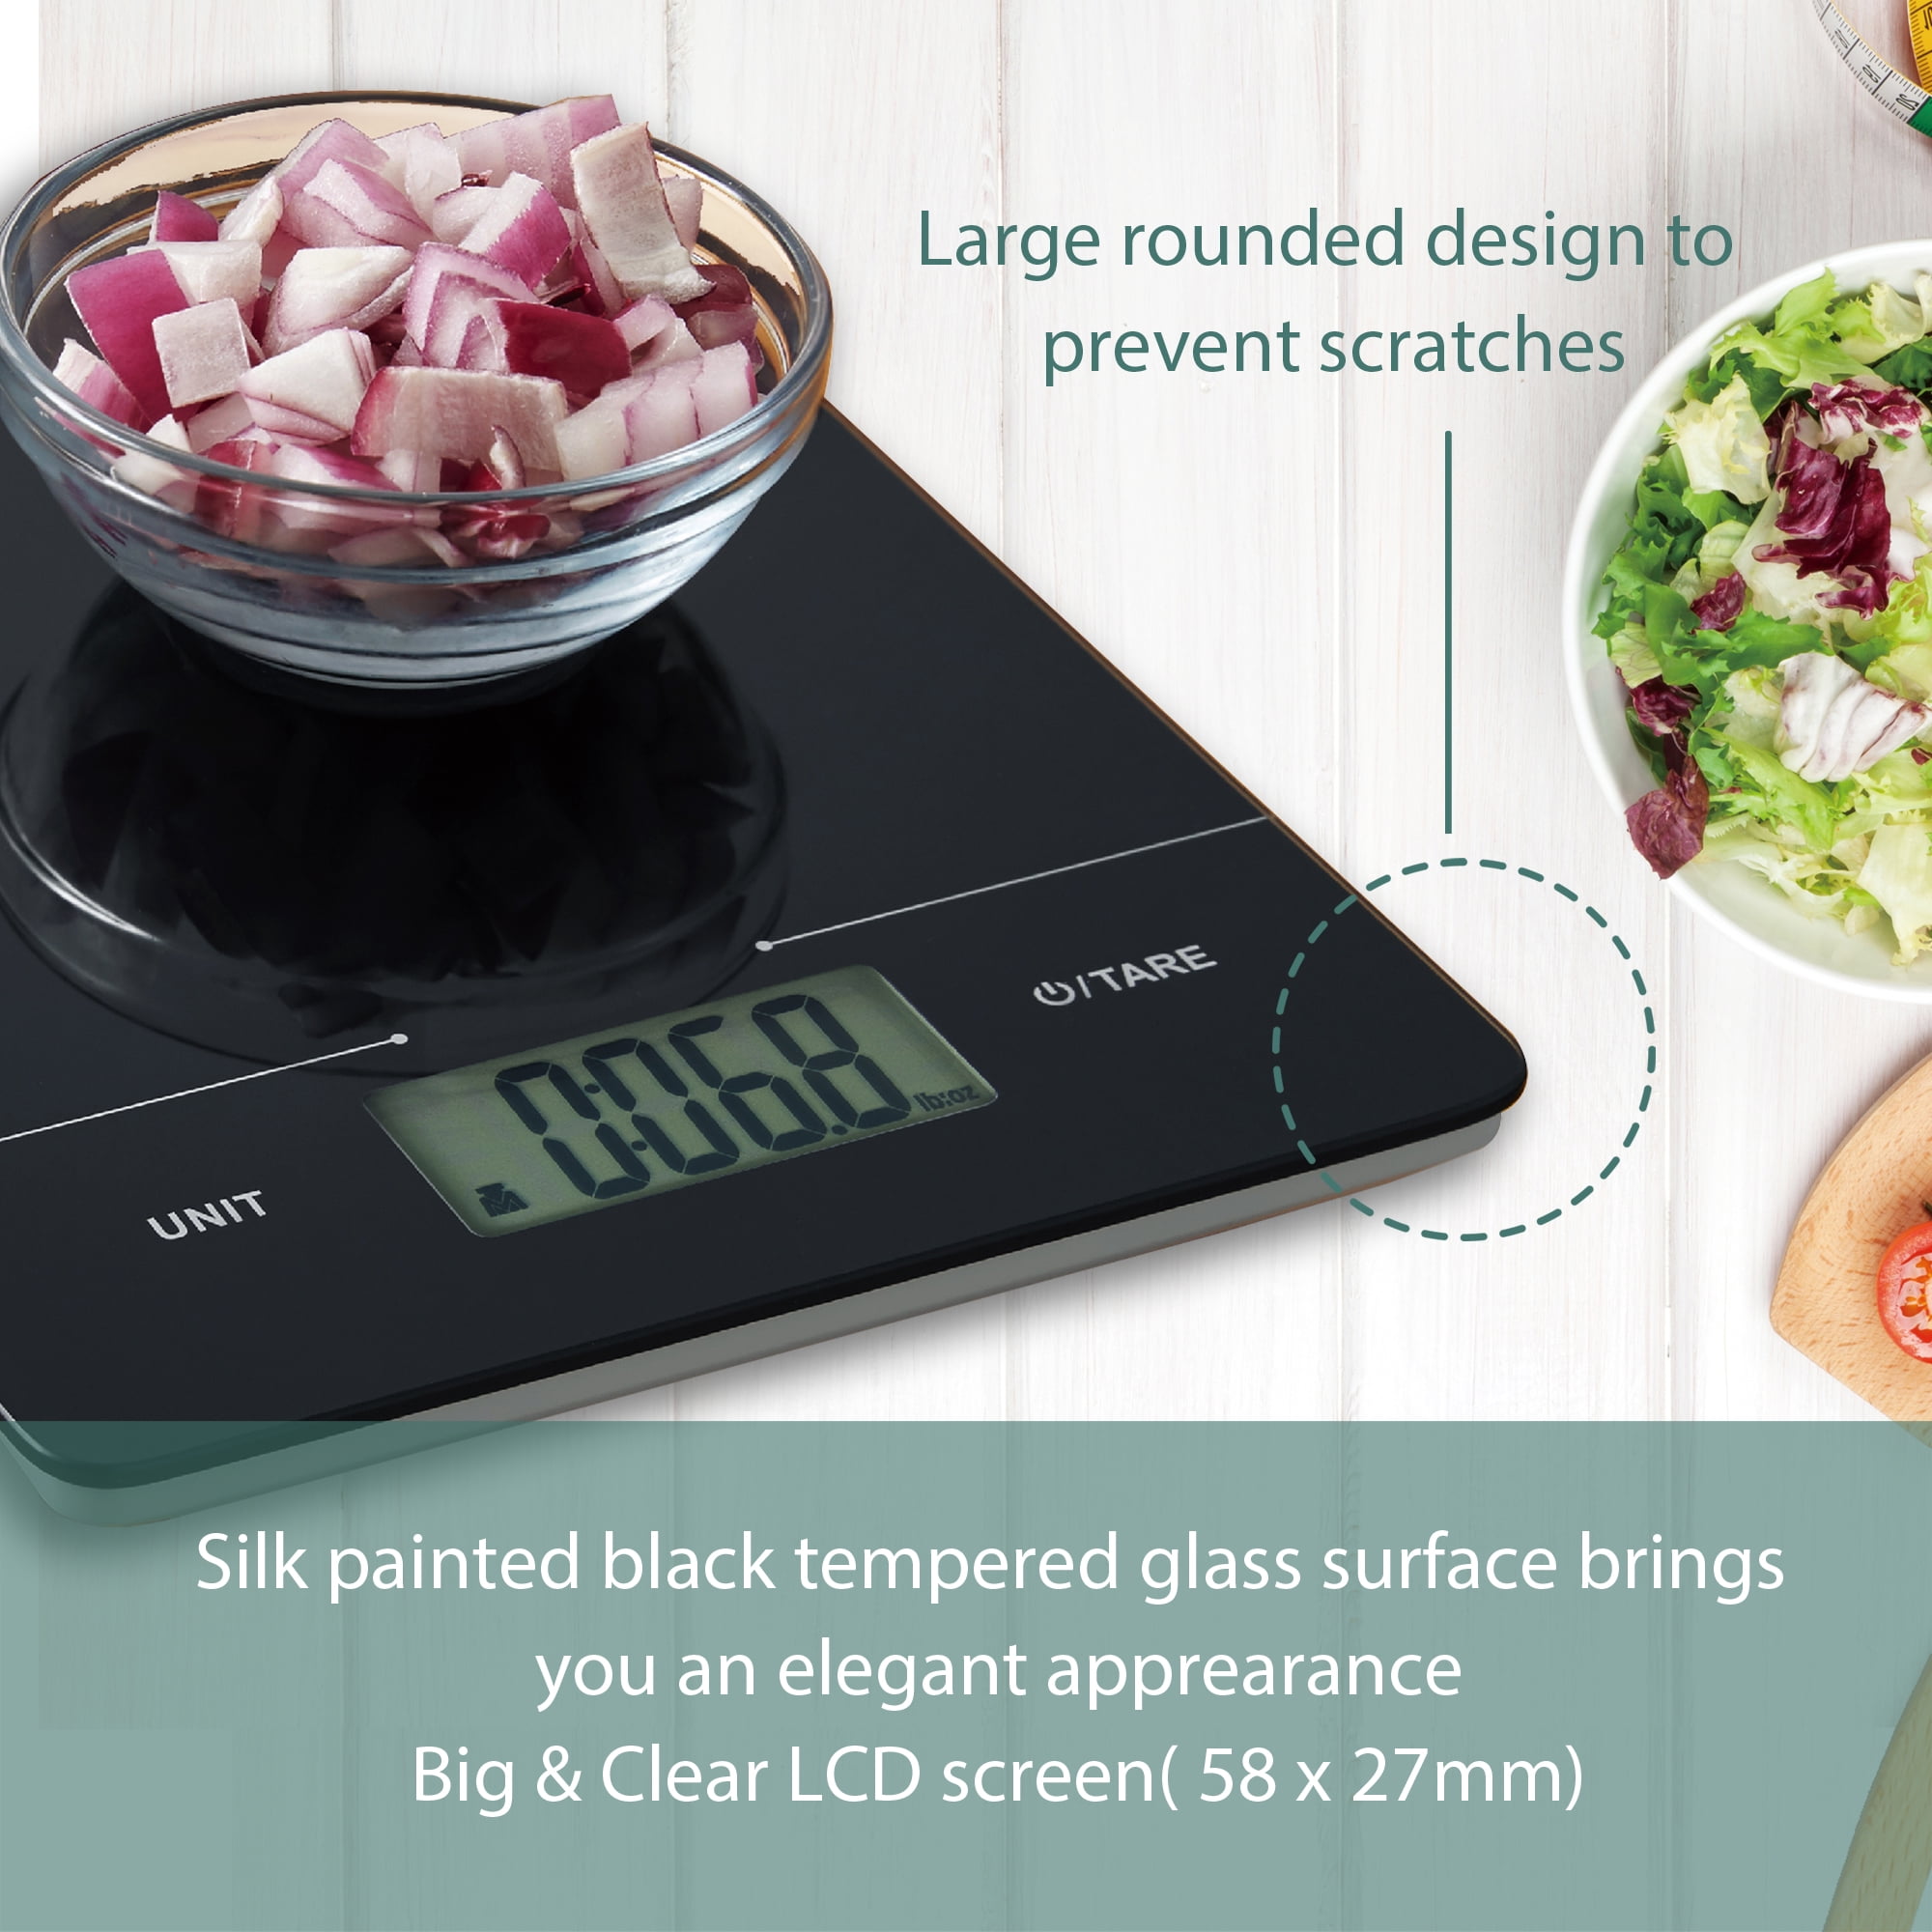 Mainstays Round Digital Kitchen Scale, Food Scale, Stainless Steel Platform, LCD Display, Size: 8.27 in Large x 7 in D x 1.22 in H